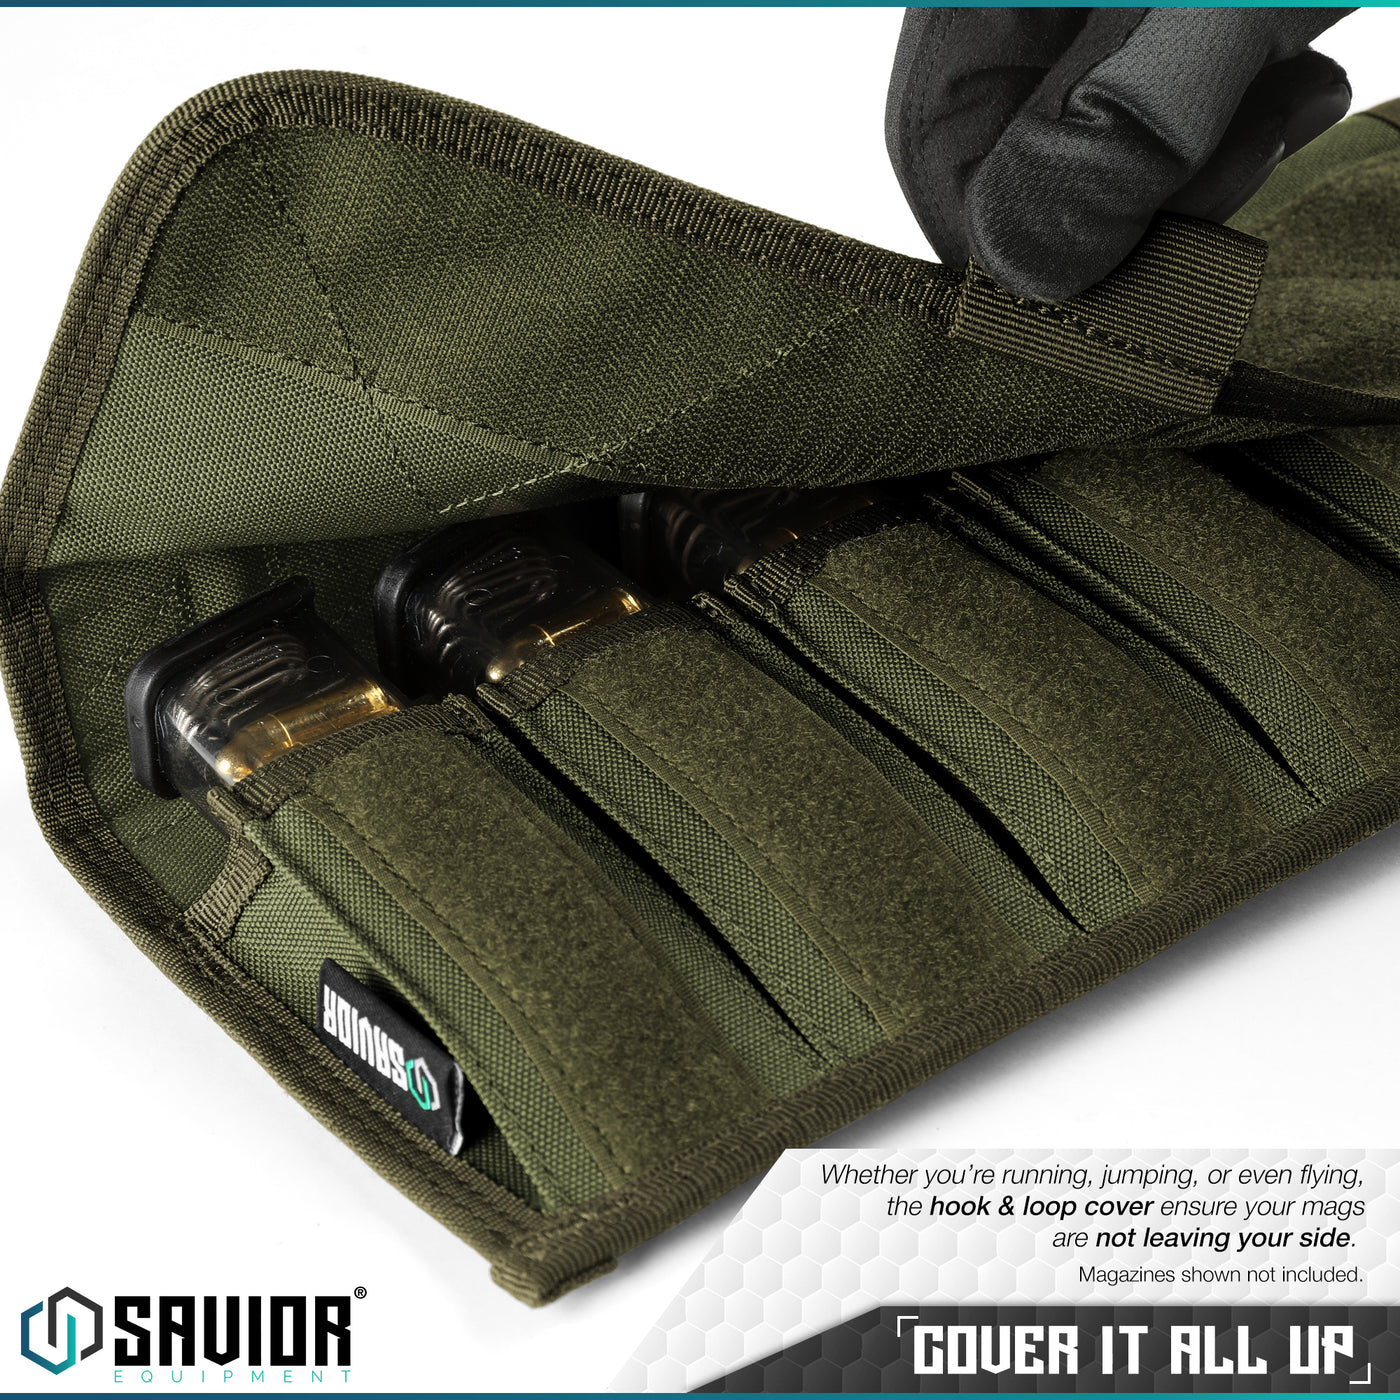 Cover it all up - Whether you're running, jumping or even flying, the hook & loop cover straps ensure your mags are not leaving your side. Magazines shown not included.